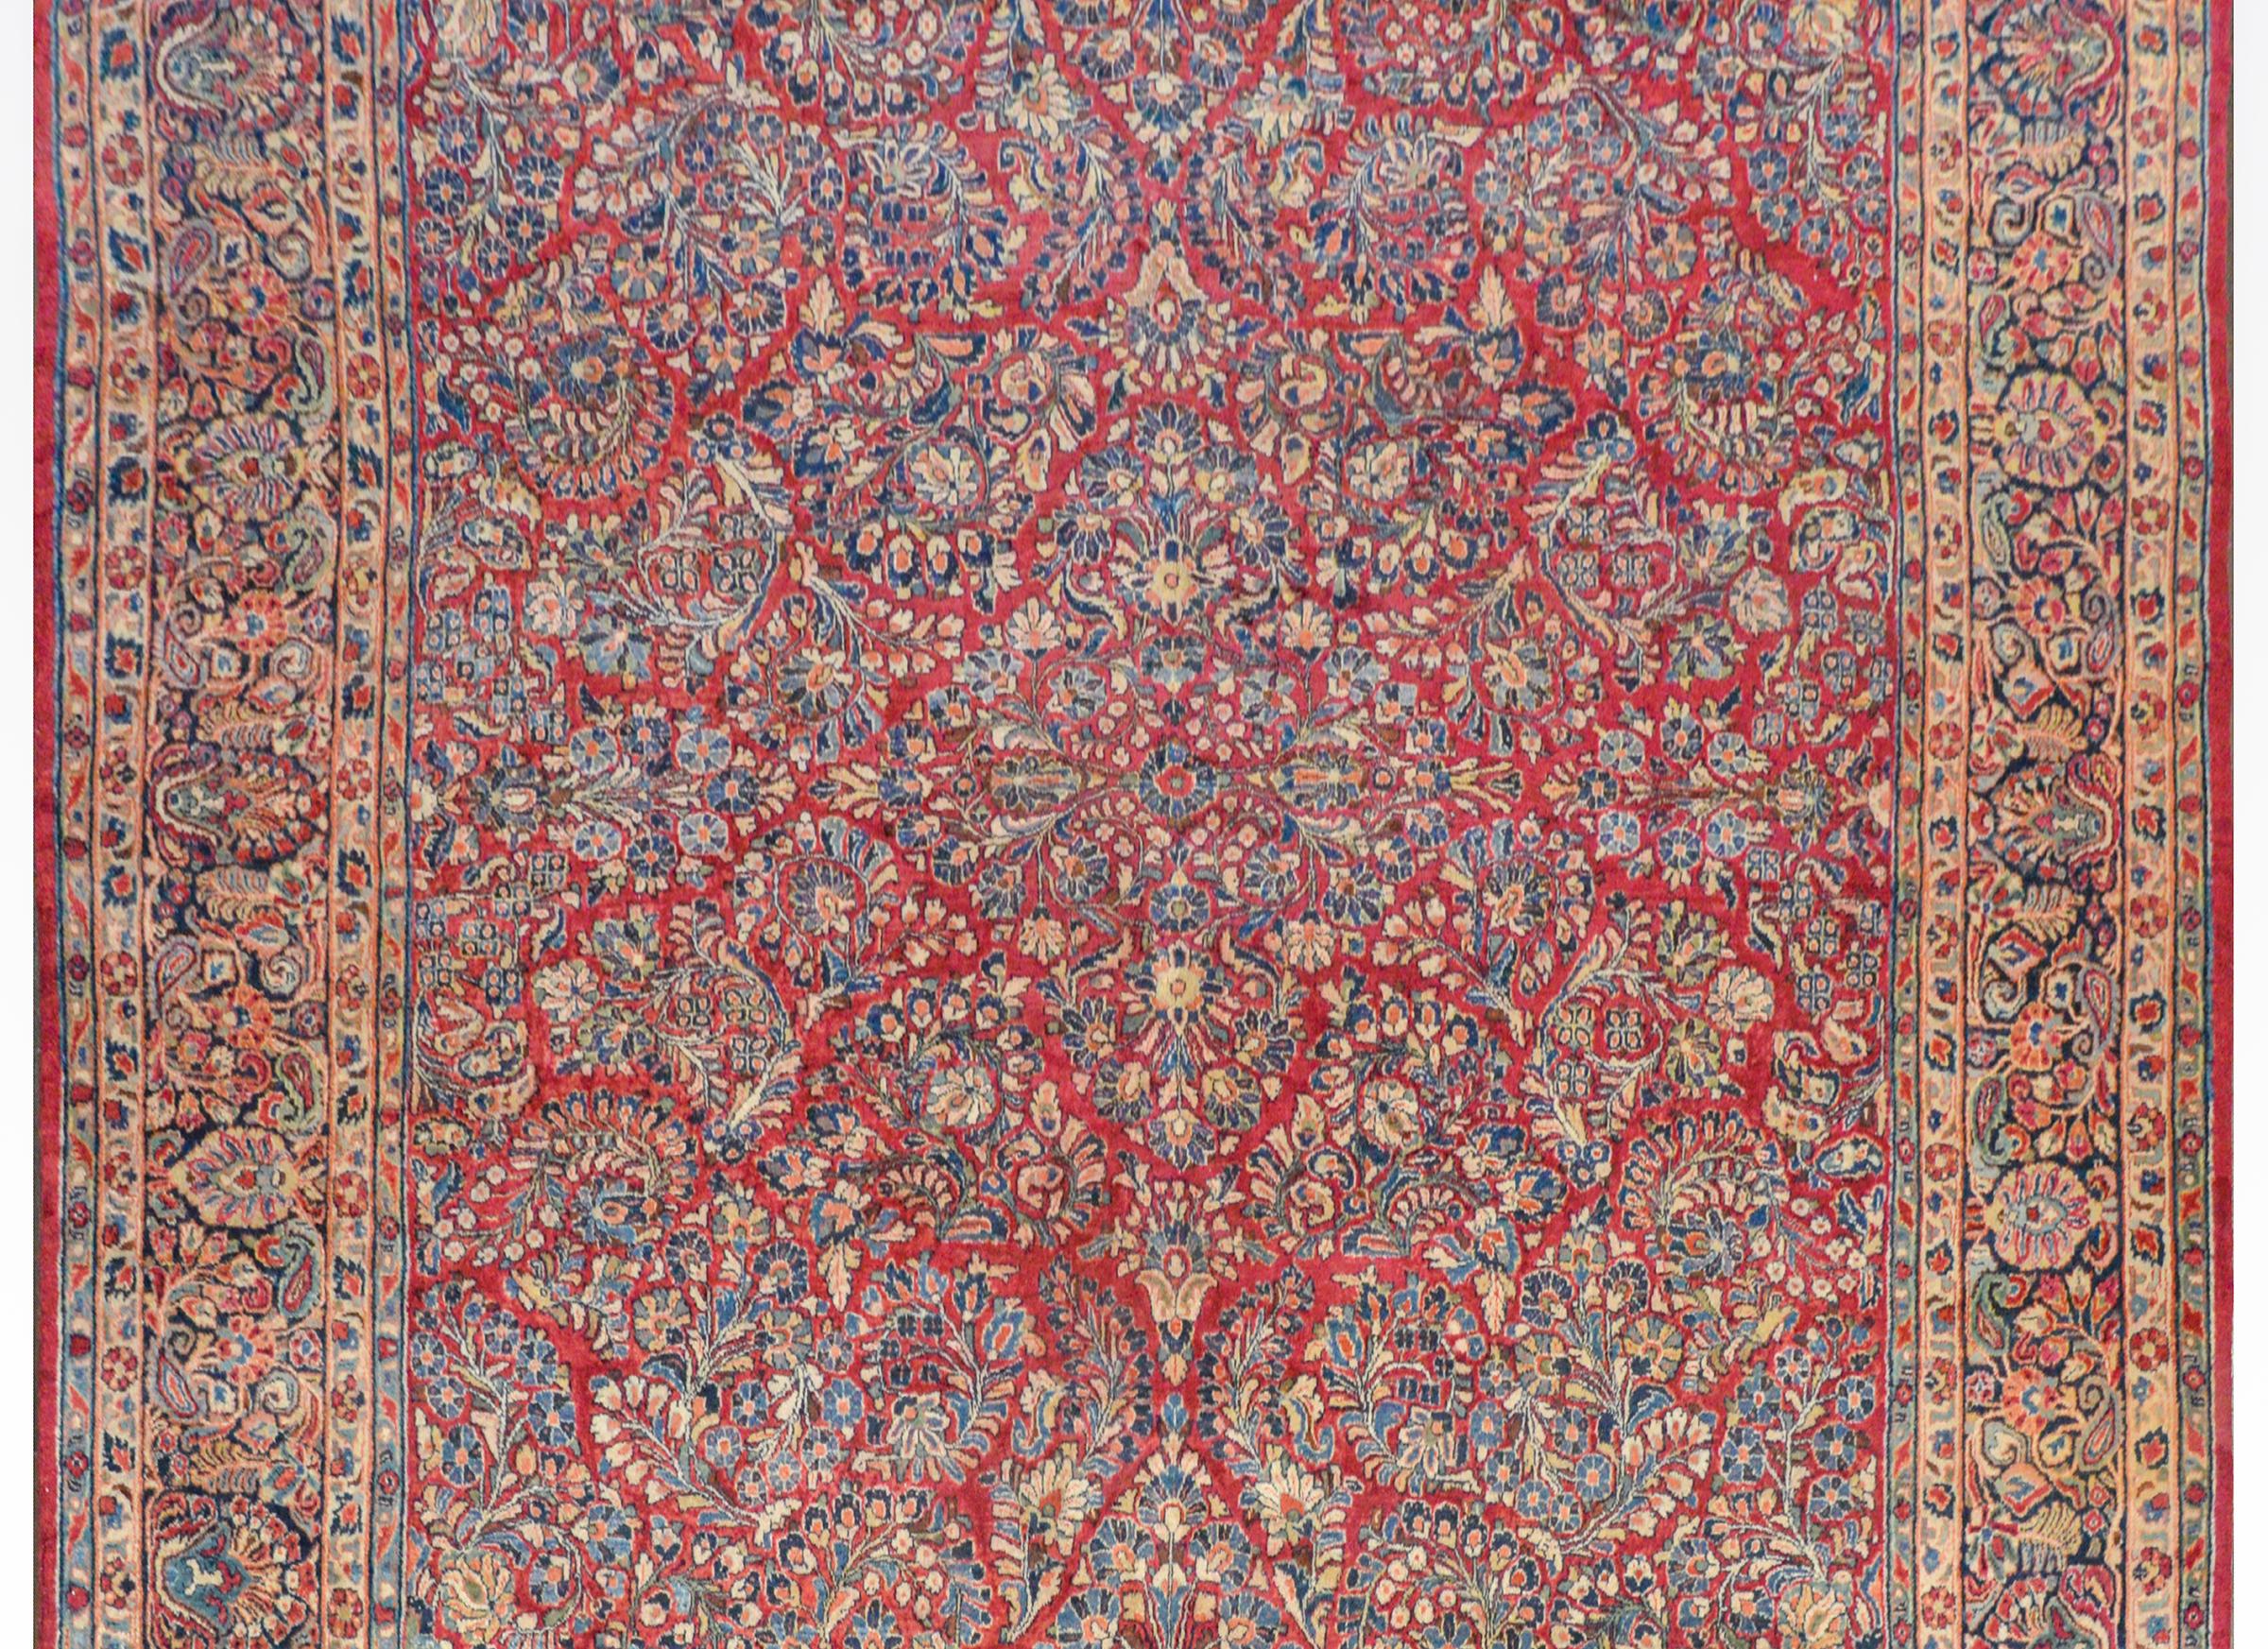 A gorgeous early 20th century Sarouk rug with a fantastic pattern of clusters of myriad flowers all woven in light and dark indigo, cream, orange, and light green vegetable dyed wool on a dark cranberry background. The border is beautiful with